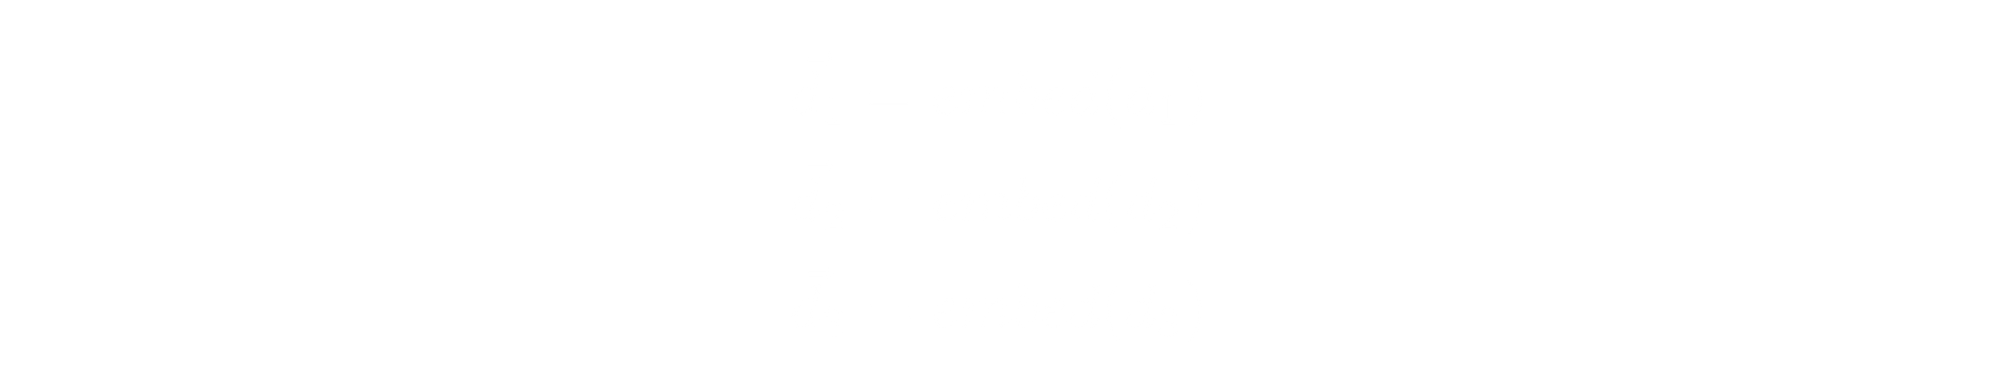 Black background with three lines of white cursive text: 'd1 = embed(d1)', 'd2 = embed(d2)', 'd3 = embed(d3)'